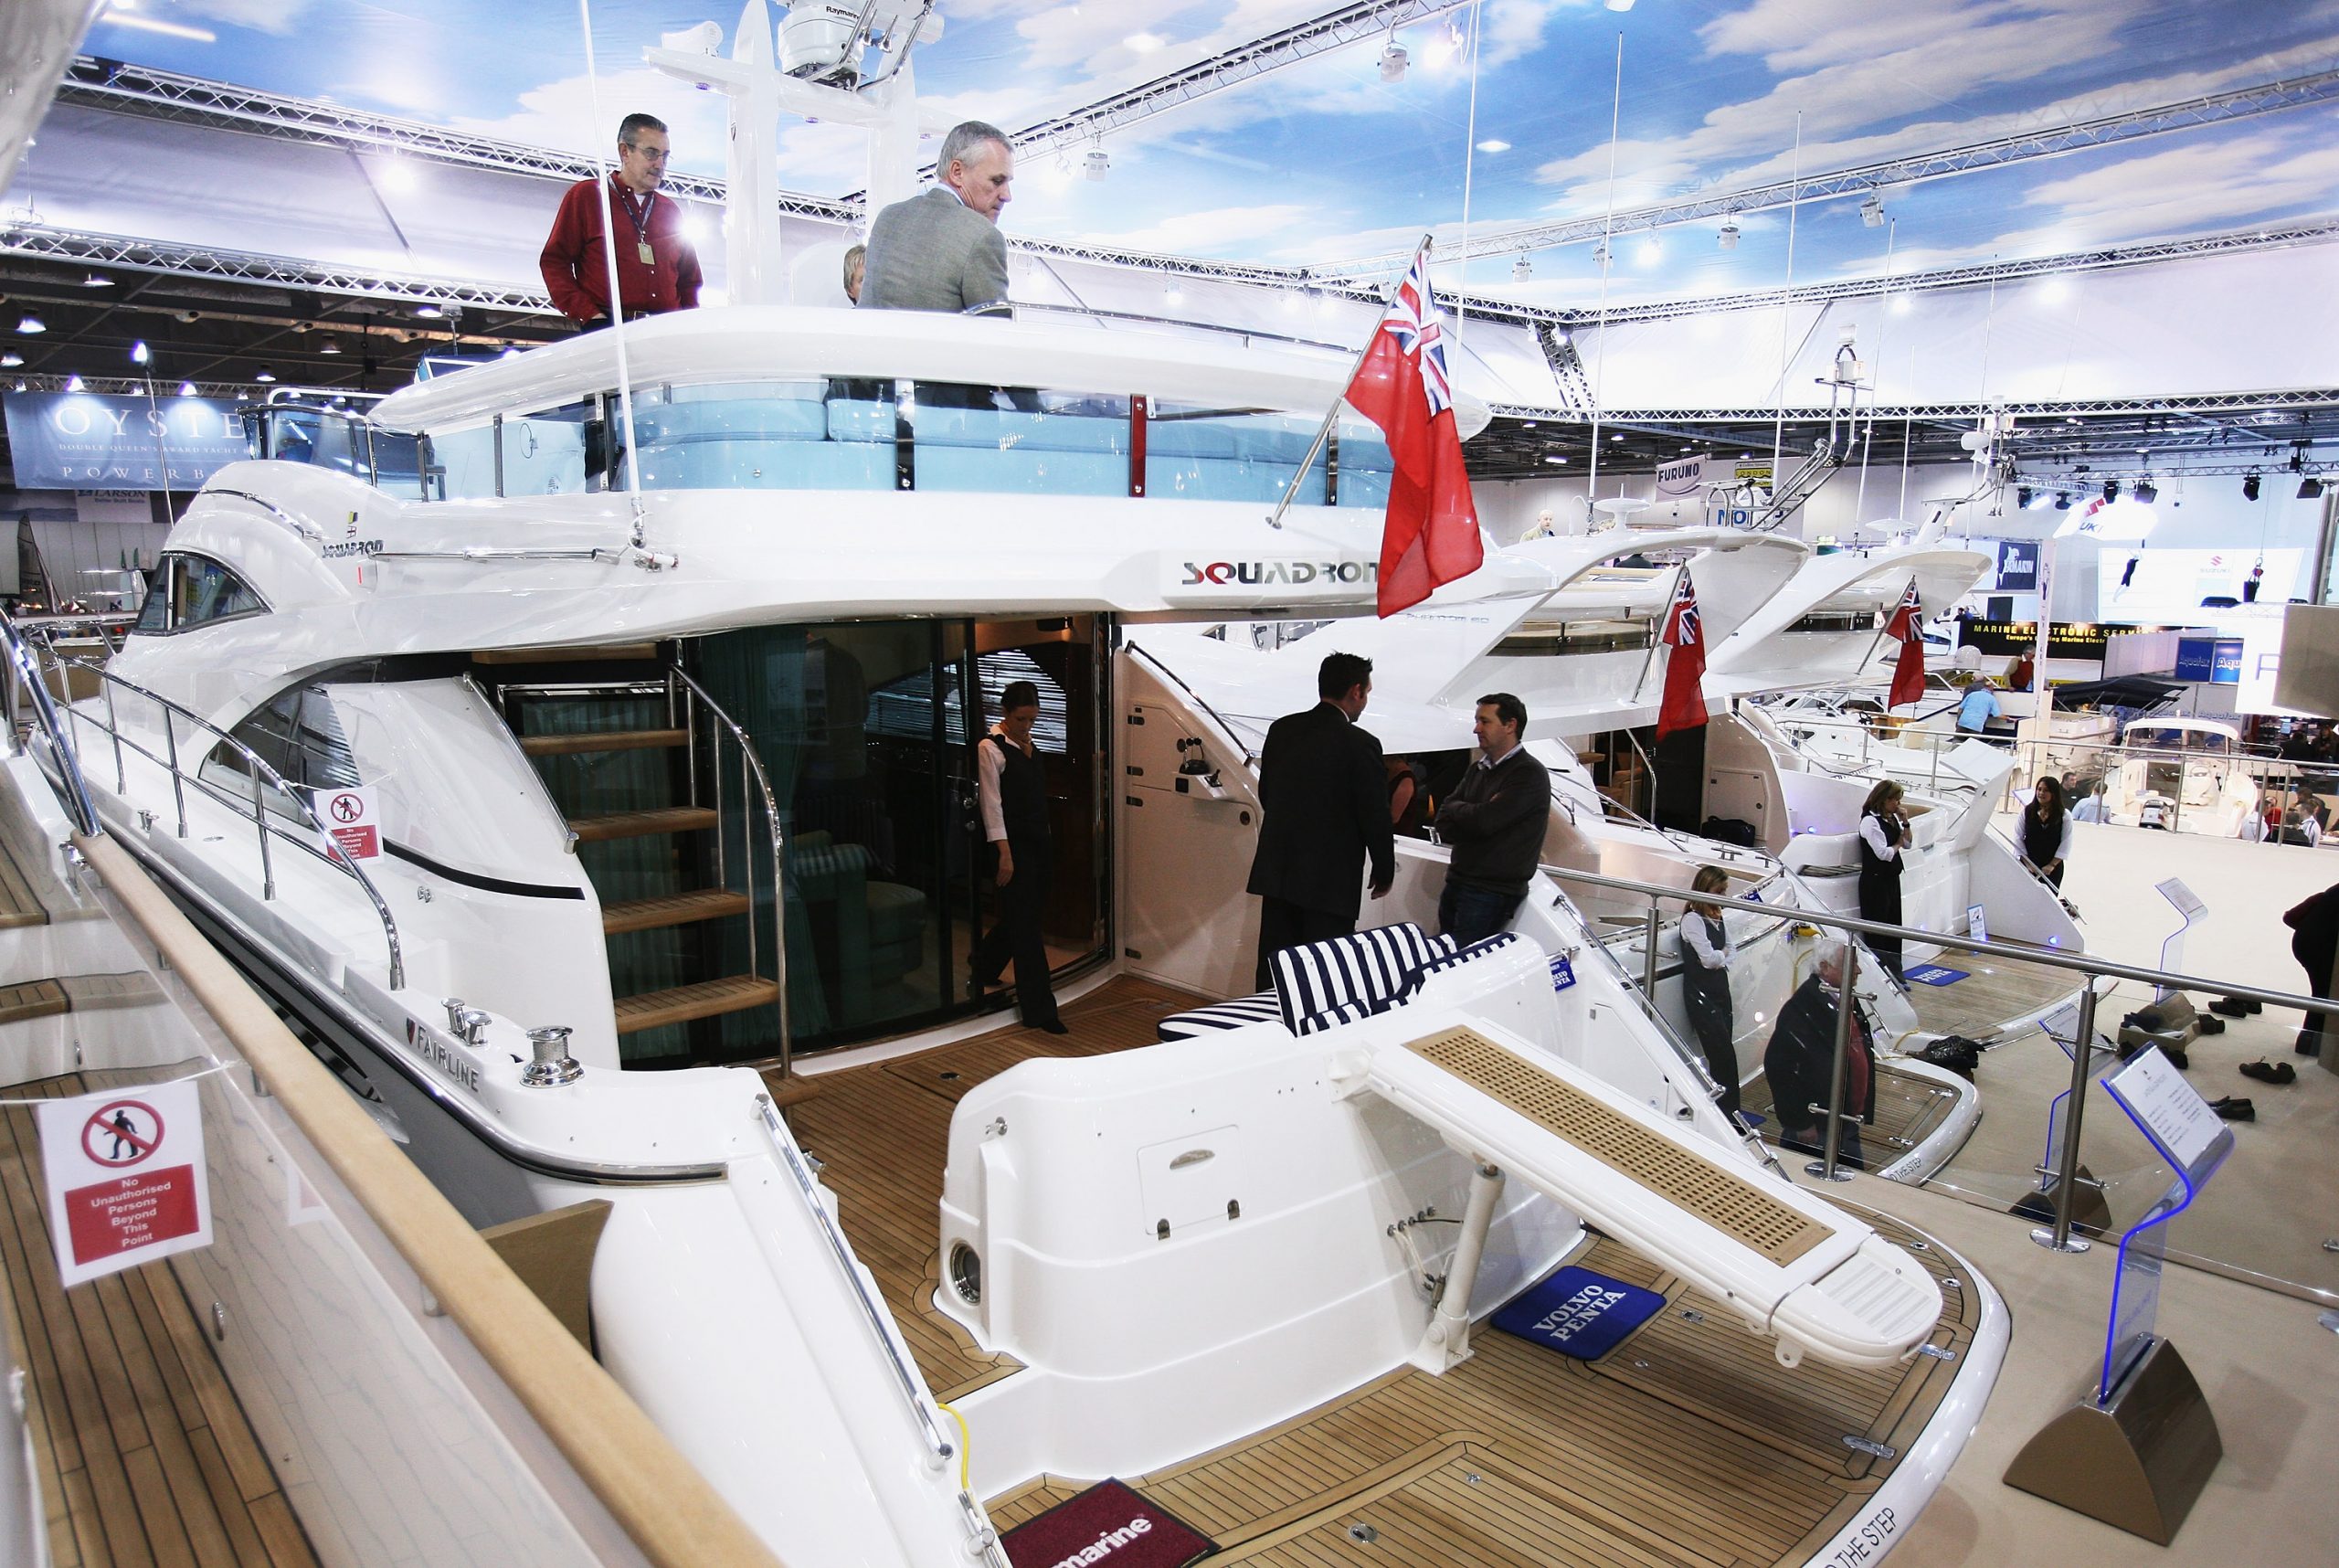 Potential buyers walk around a boat during show